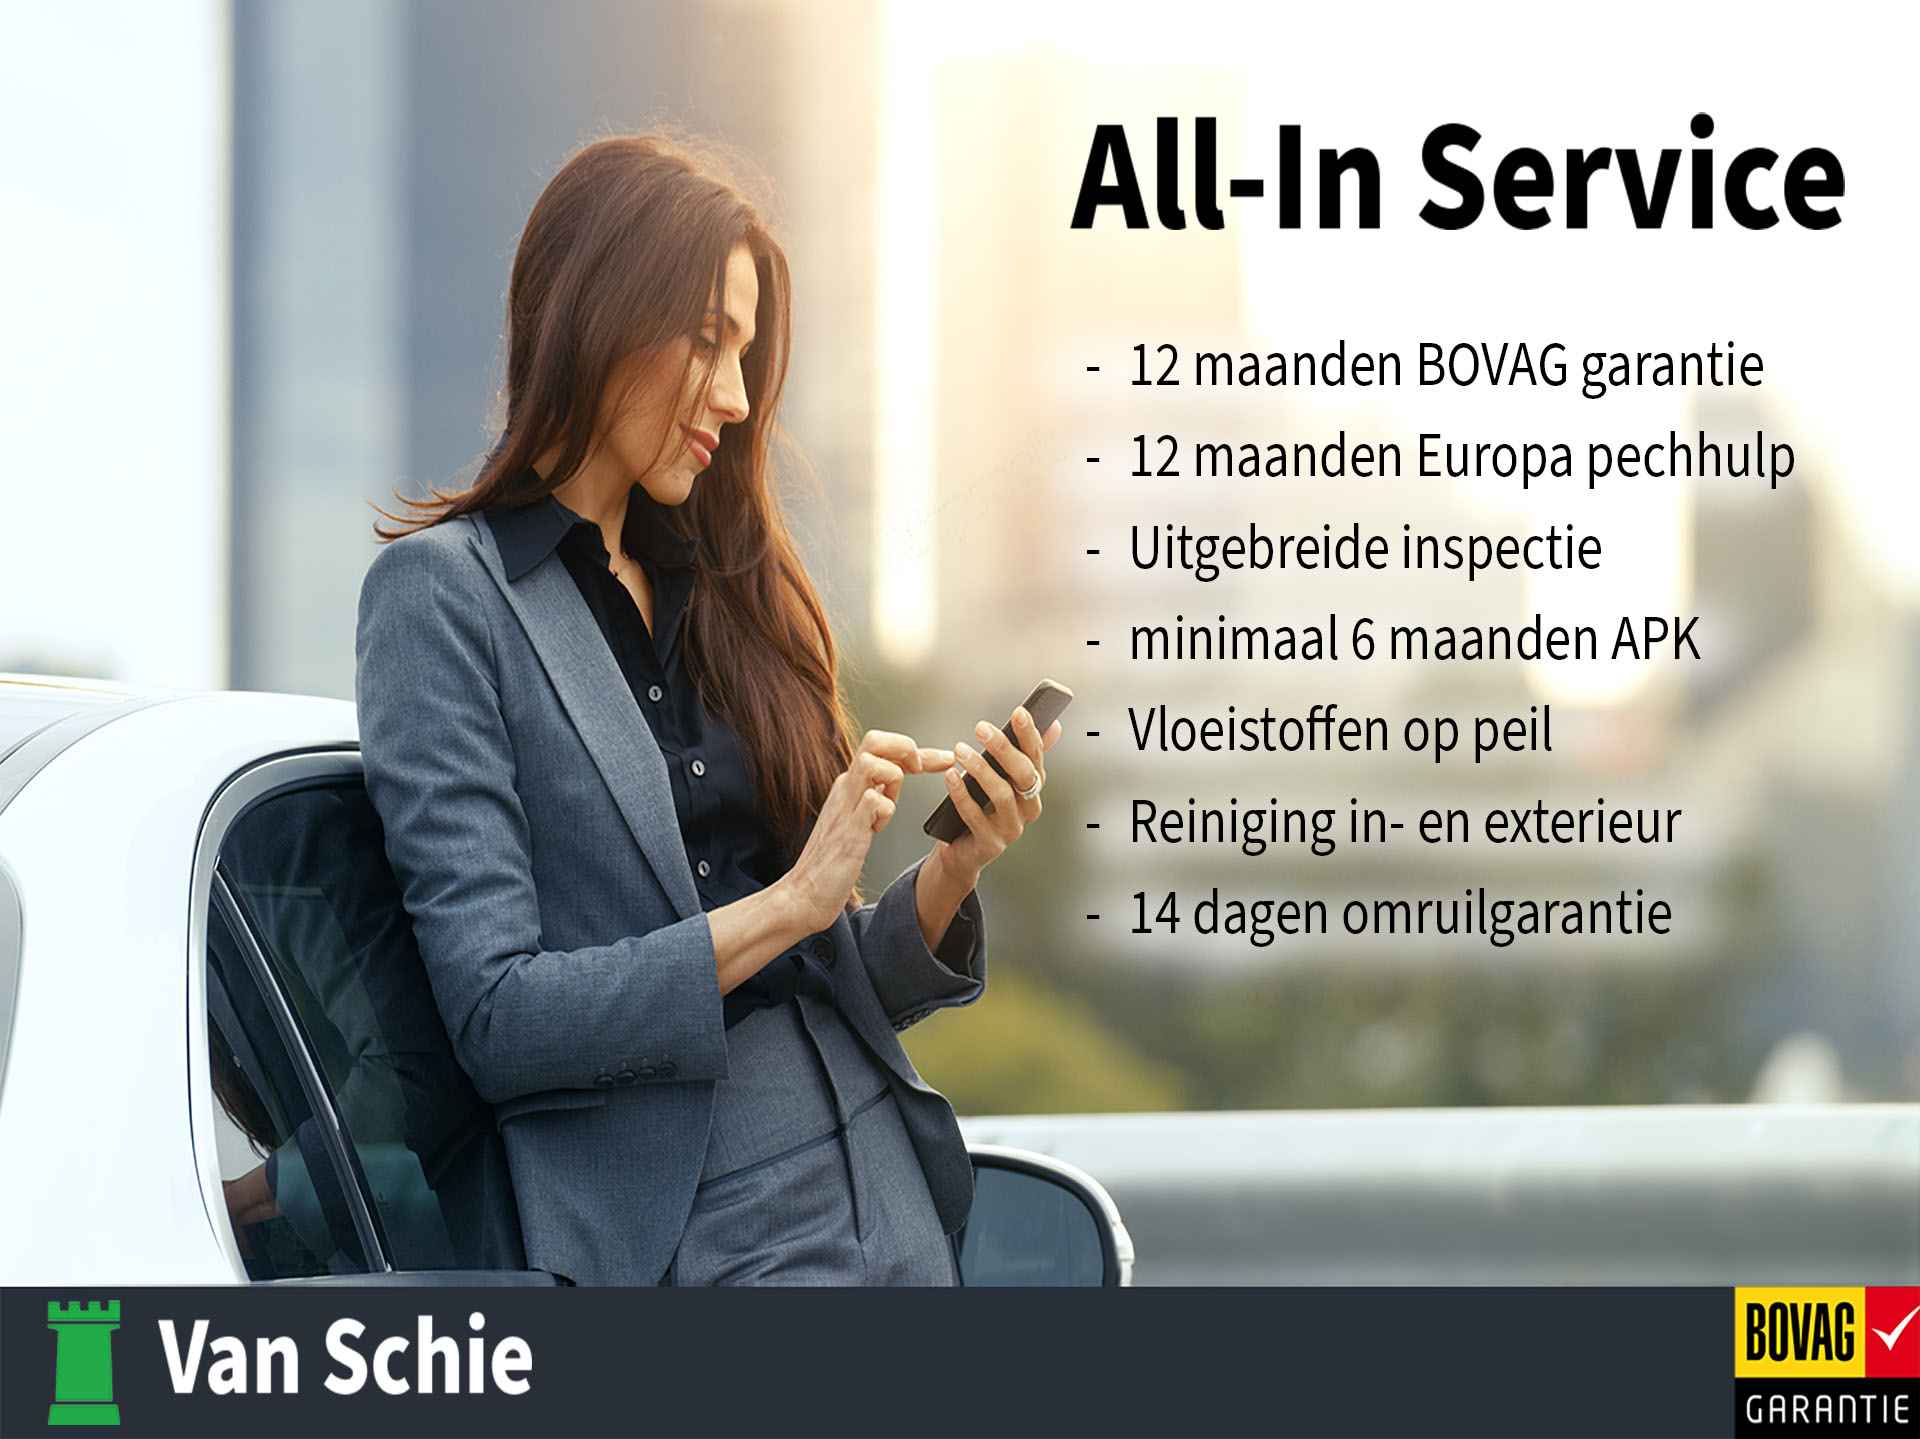 Ford Focus 1.0i Hybrid Connected, (149PK) 1e-Eig, Ford-Dealer-Onderh, 12-Mnd-BOVAG, NL-Auto, Navigatie/Apple-Carplay/Android-Auto, Parkeersensoren-V+A, Cruise-Control, Airco, DAB, Lane-Assist, Privacy-Glas, Sportstoelen, Led-Koplampen, Adaptieve-Cruise-Control - 53/55